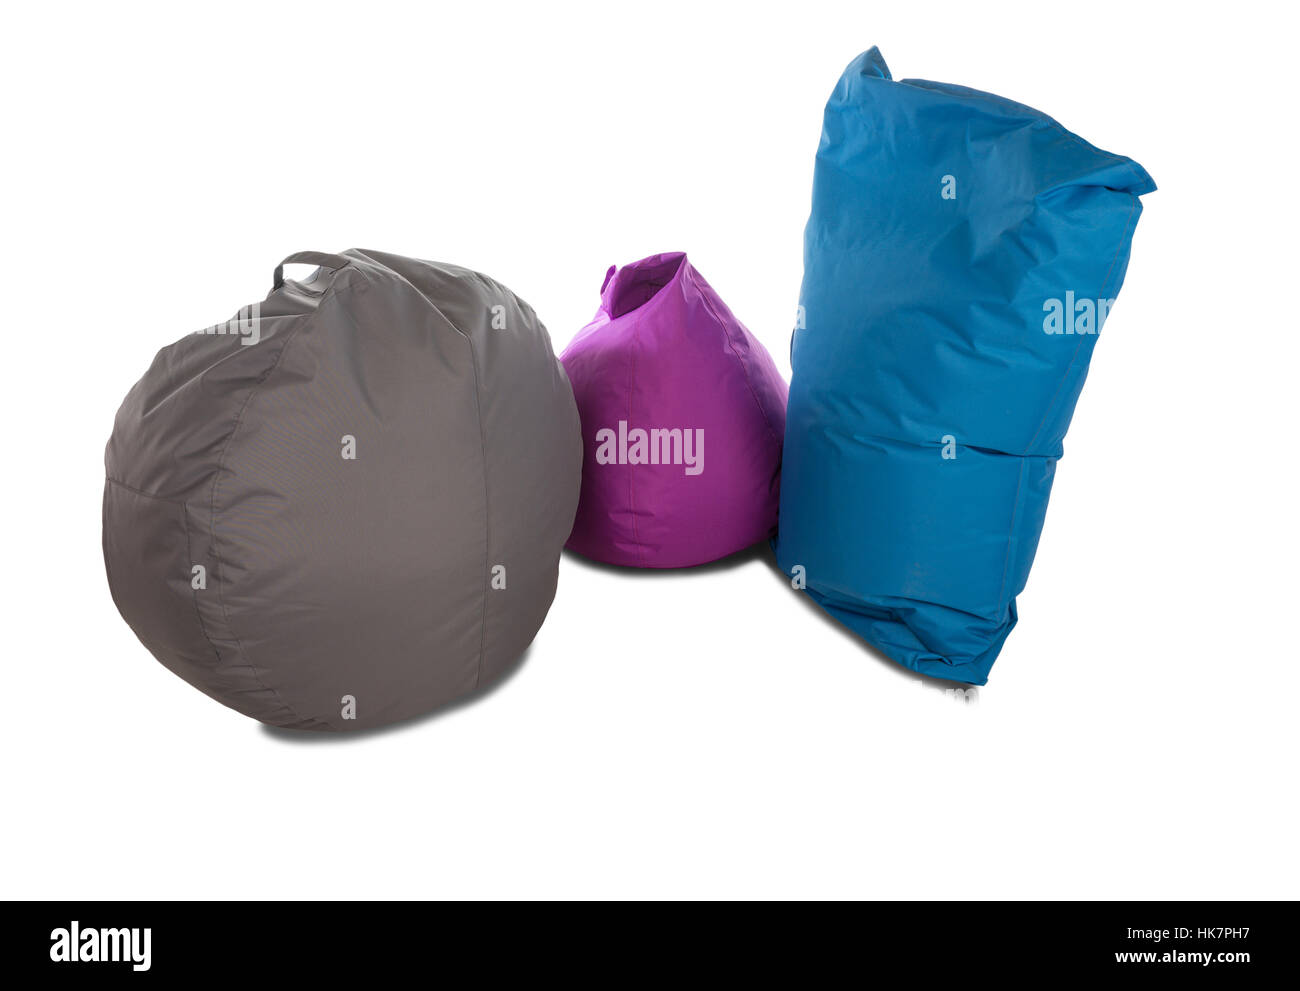 Blue, grey and purple beanbag chairs for living room isolated on white background Stock Photo